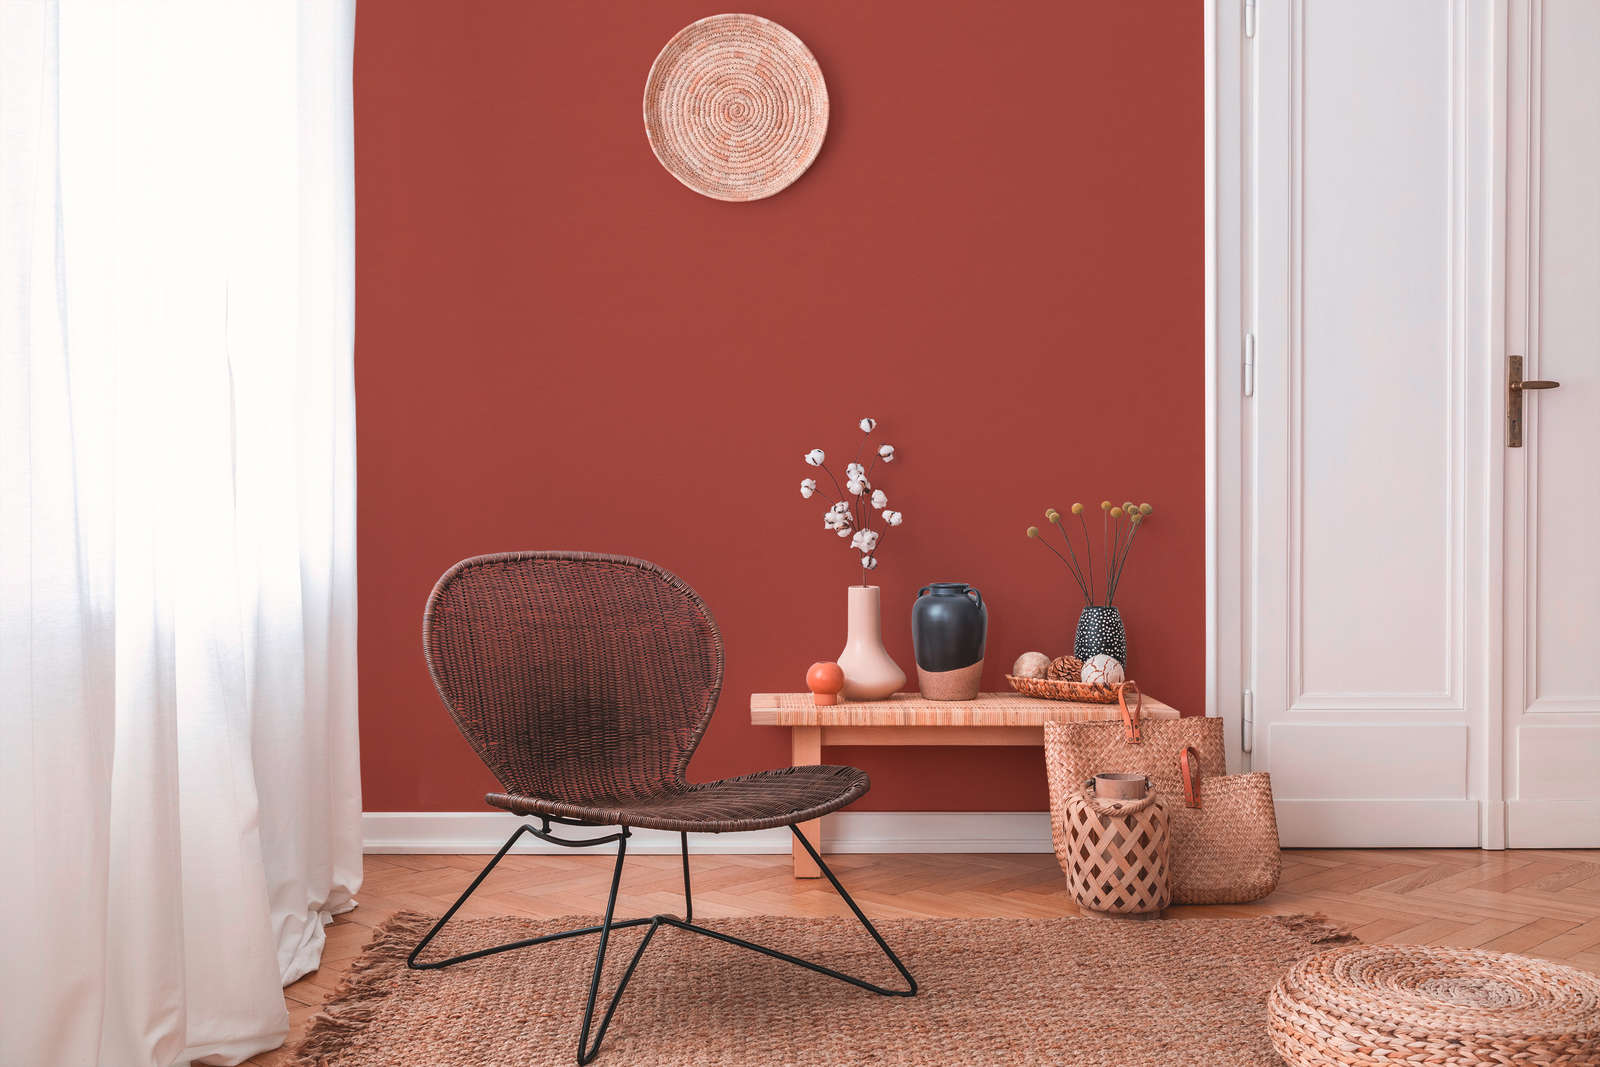             Red wallpaper fireplace red plain with textile design
        